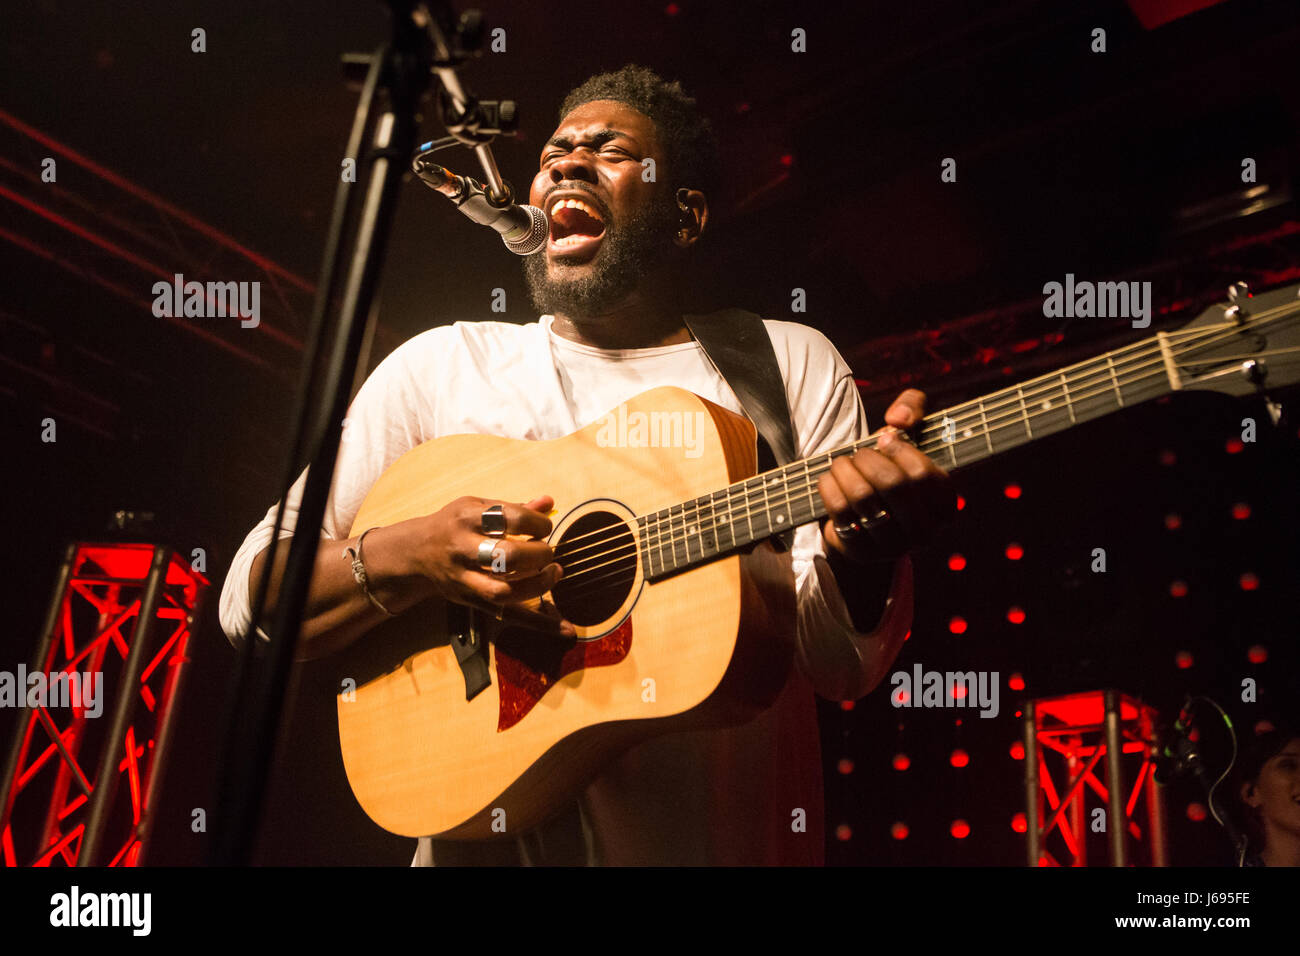 Milan Italy. 19th May 2017. The English singer-songwriter JAKE ISAAC  performs live on stage at Tunnel during the "Our Lives Tour 2017" Credit:  Rodolfo Sassano/Alamy Live News Stock Photo - Alamy